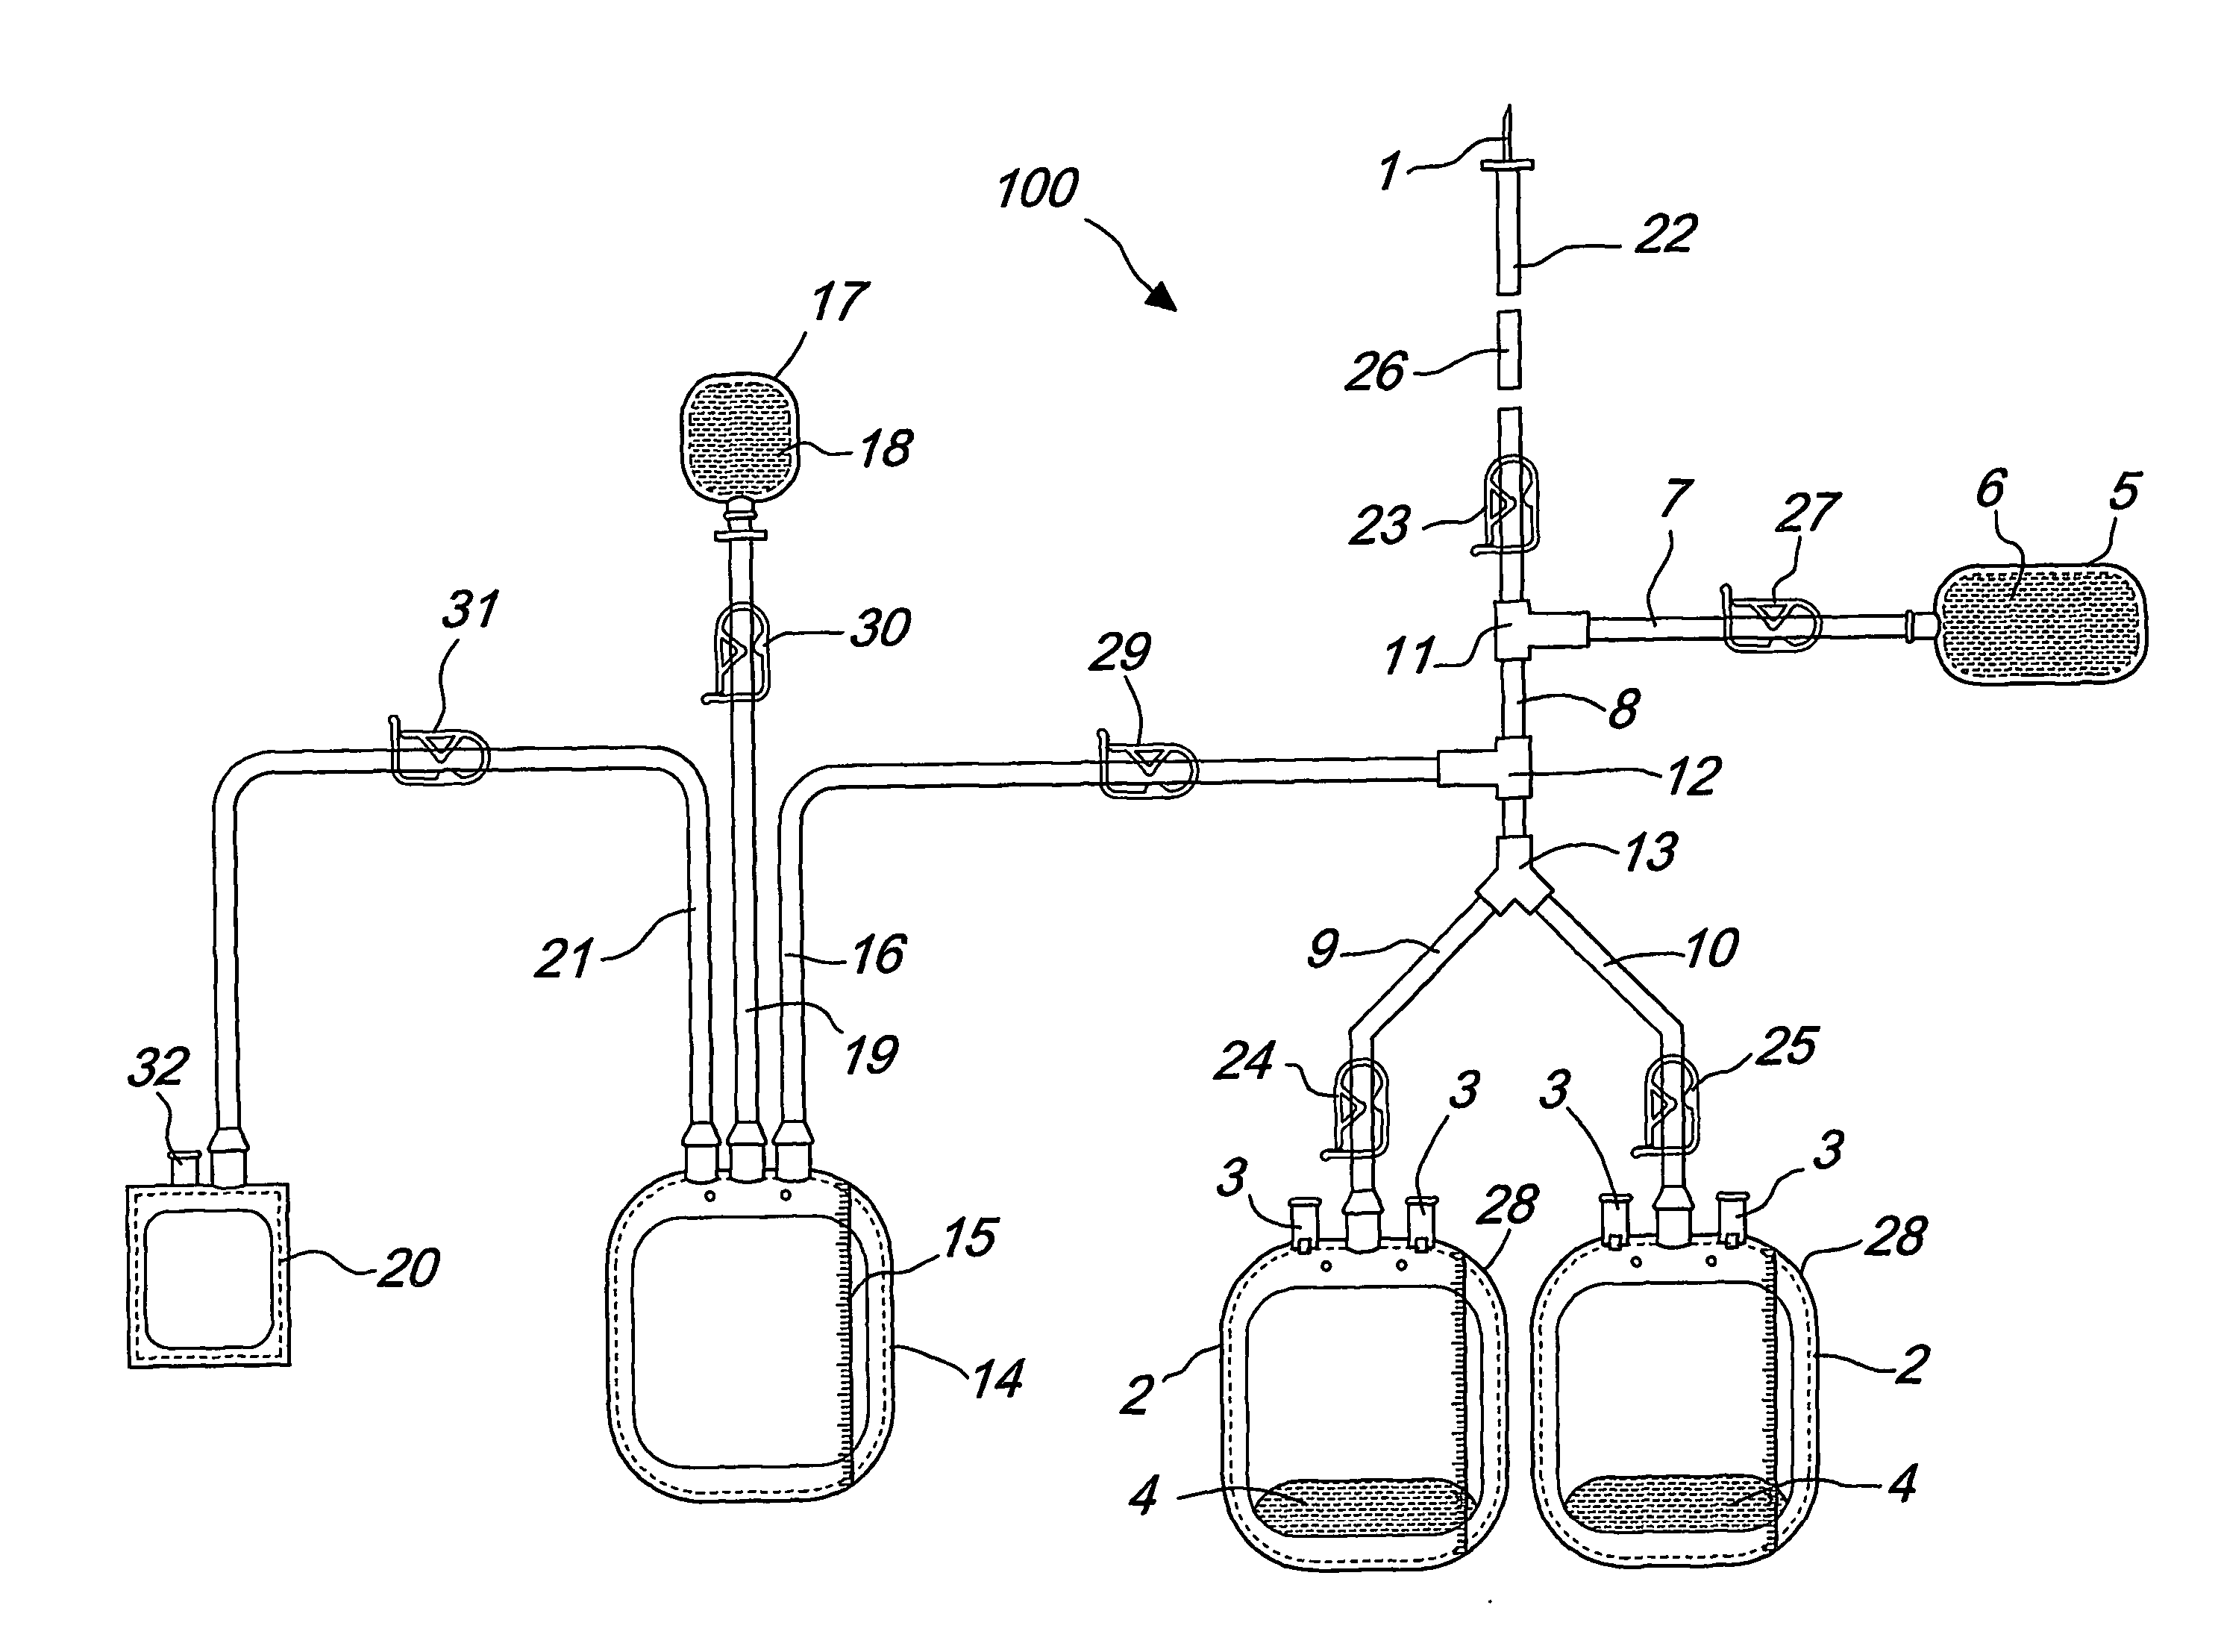 Method and apparatus for fractionating blood